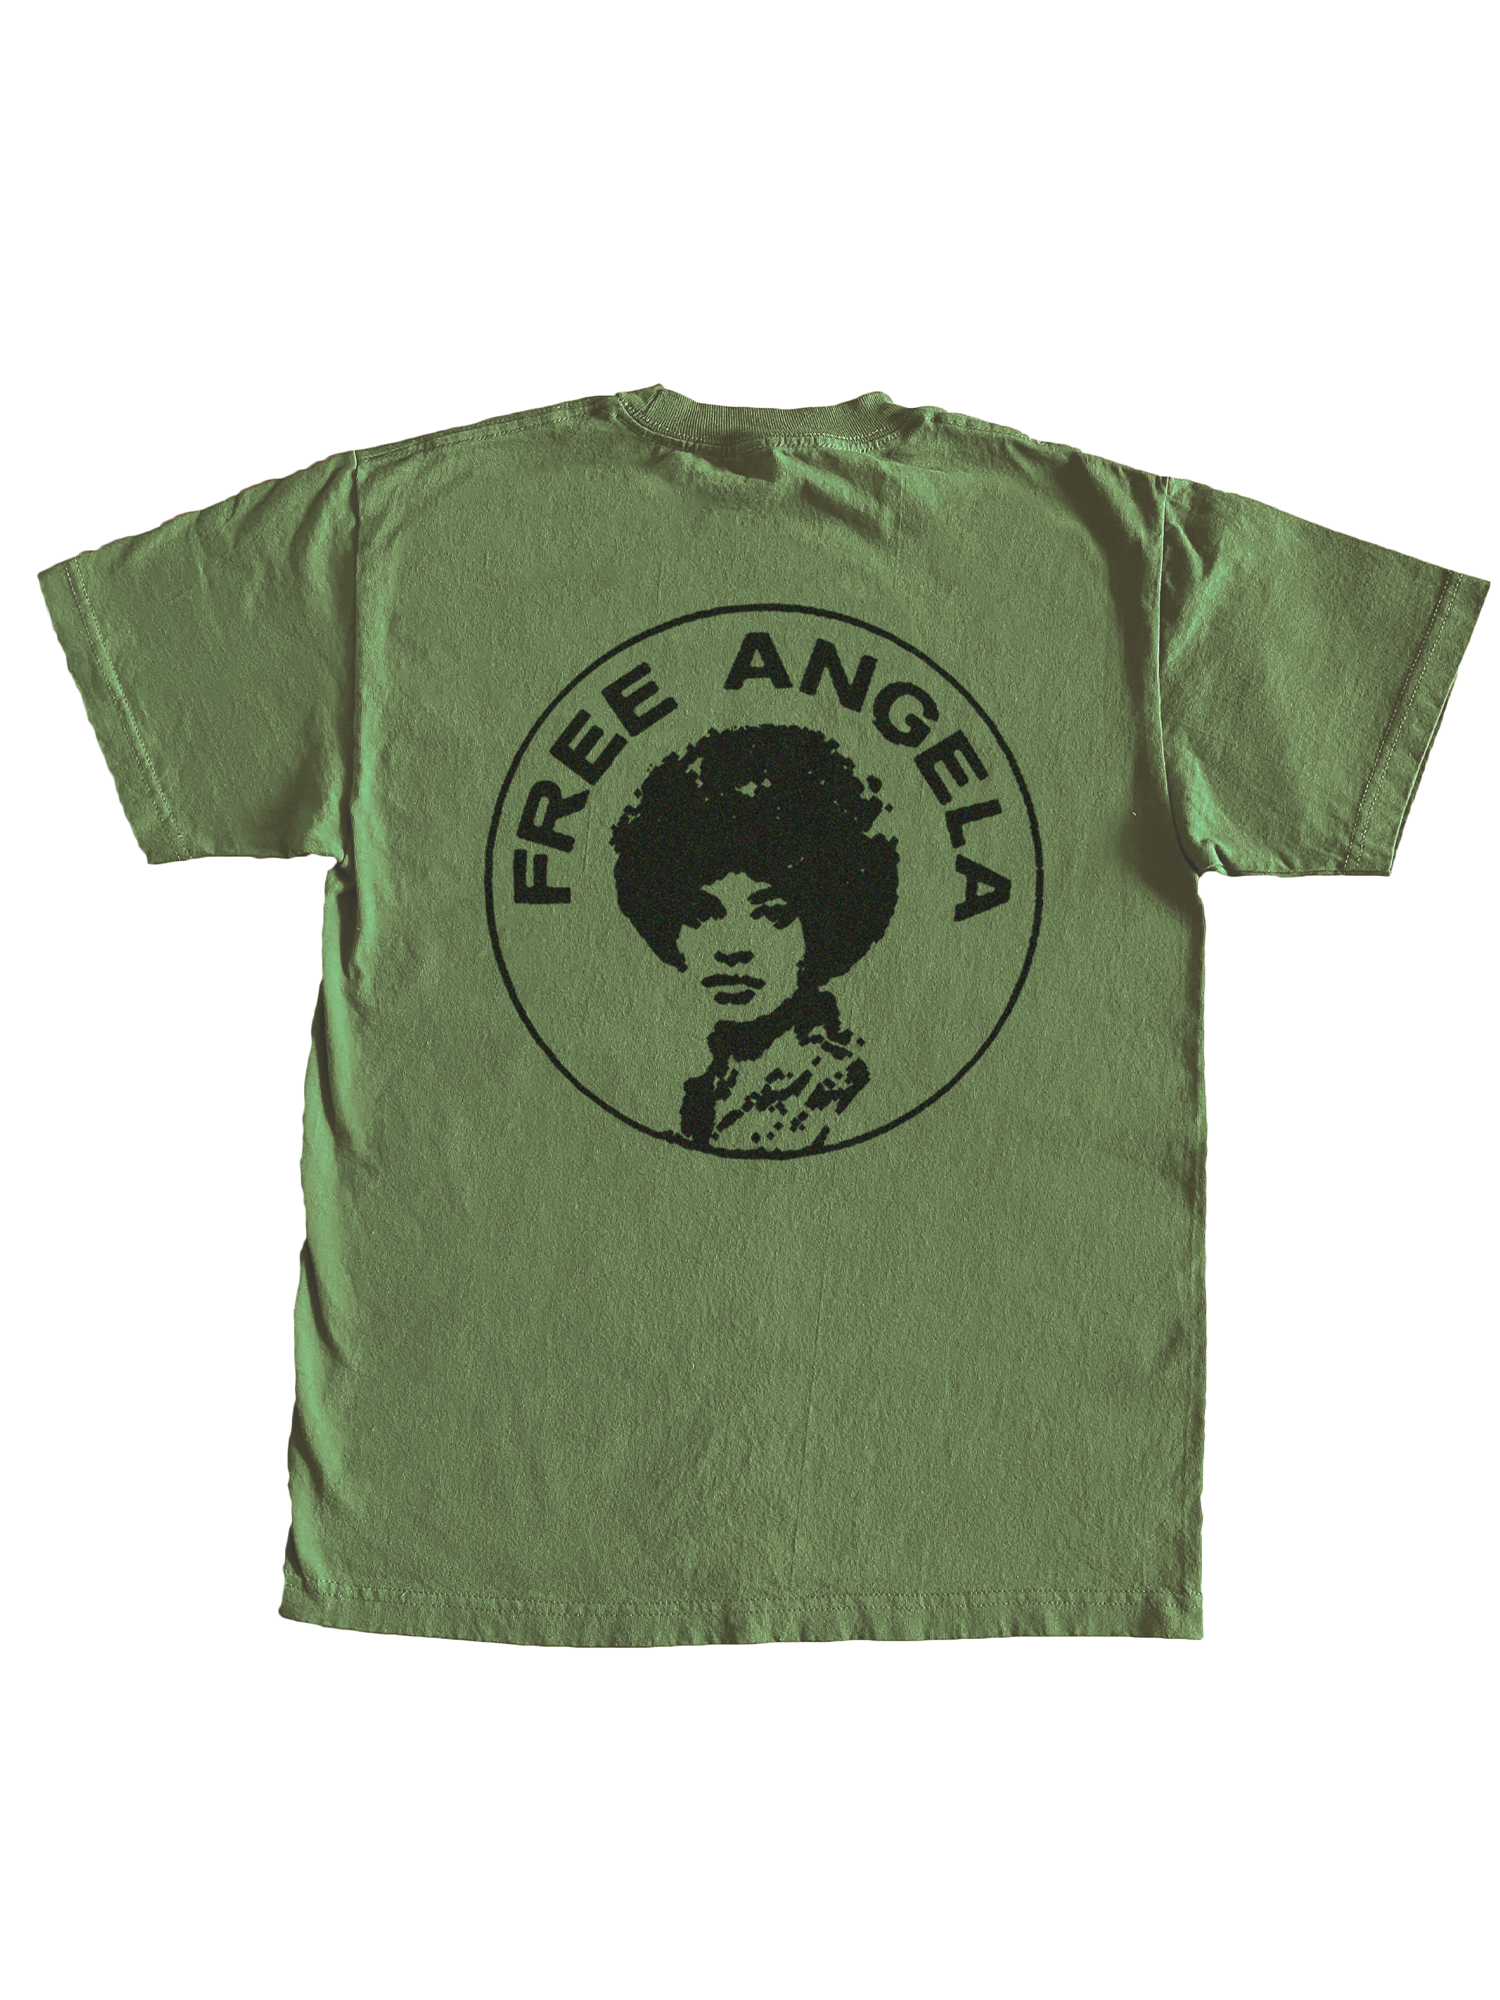 Free Angela Recycled Cotton Tee - Moss